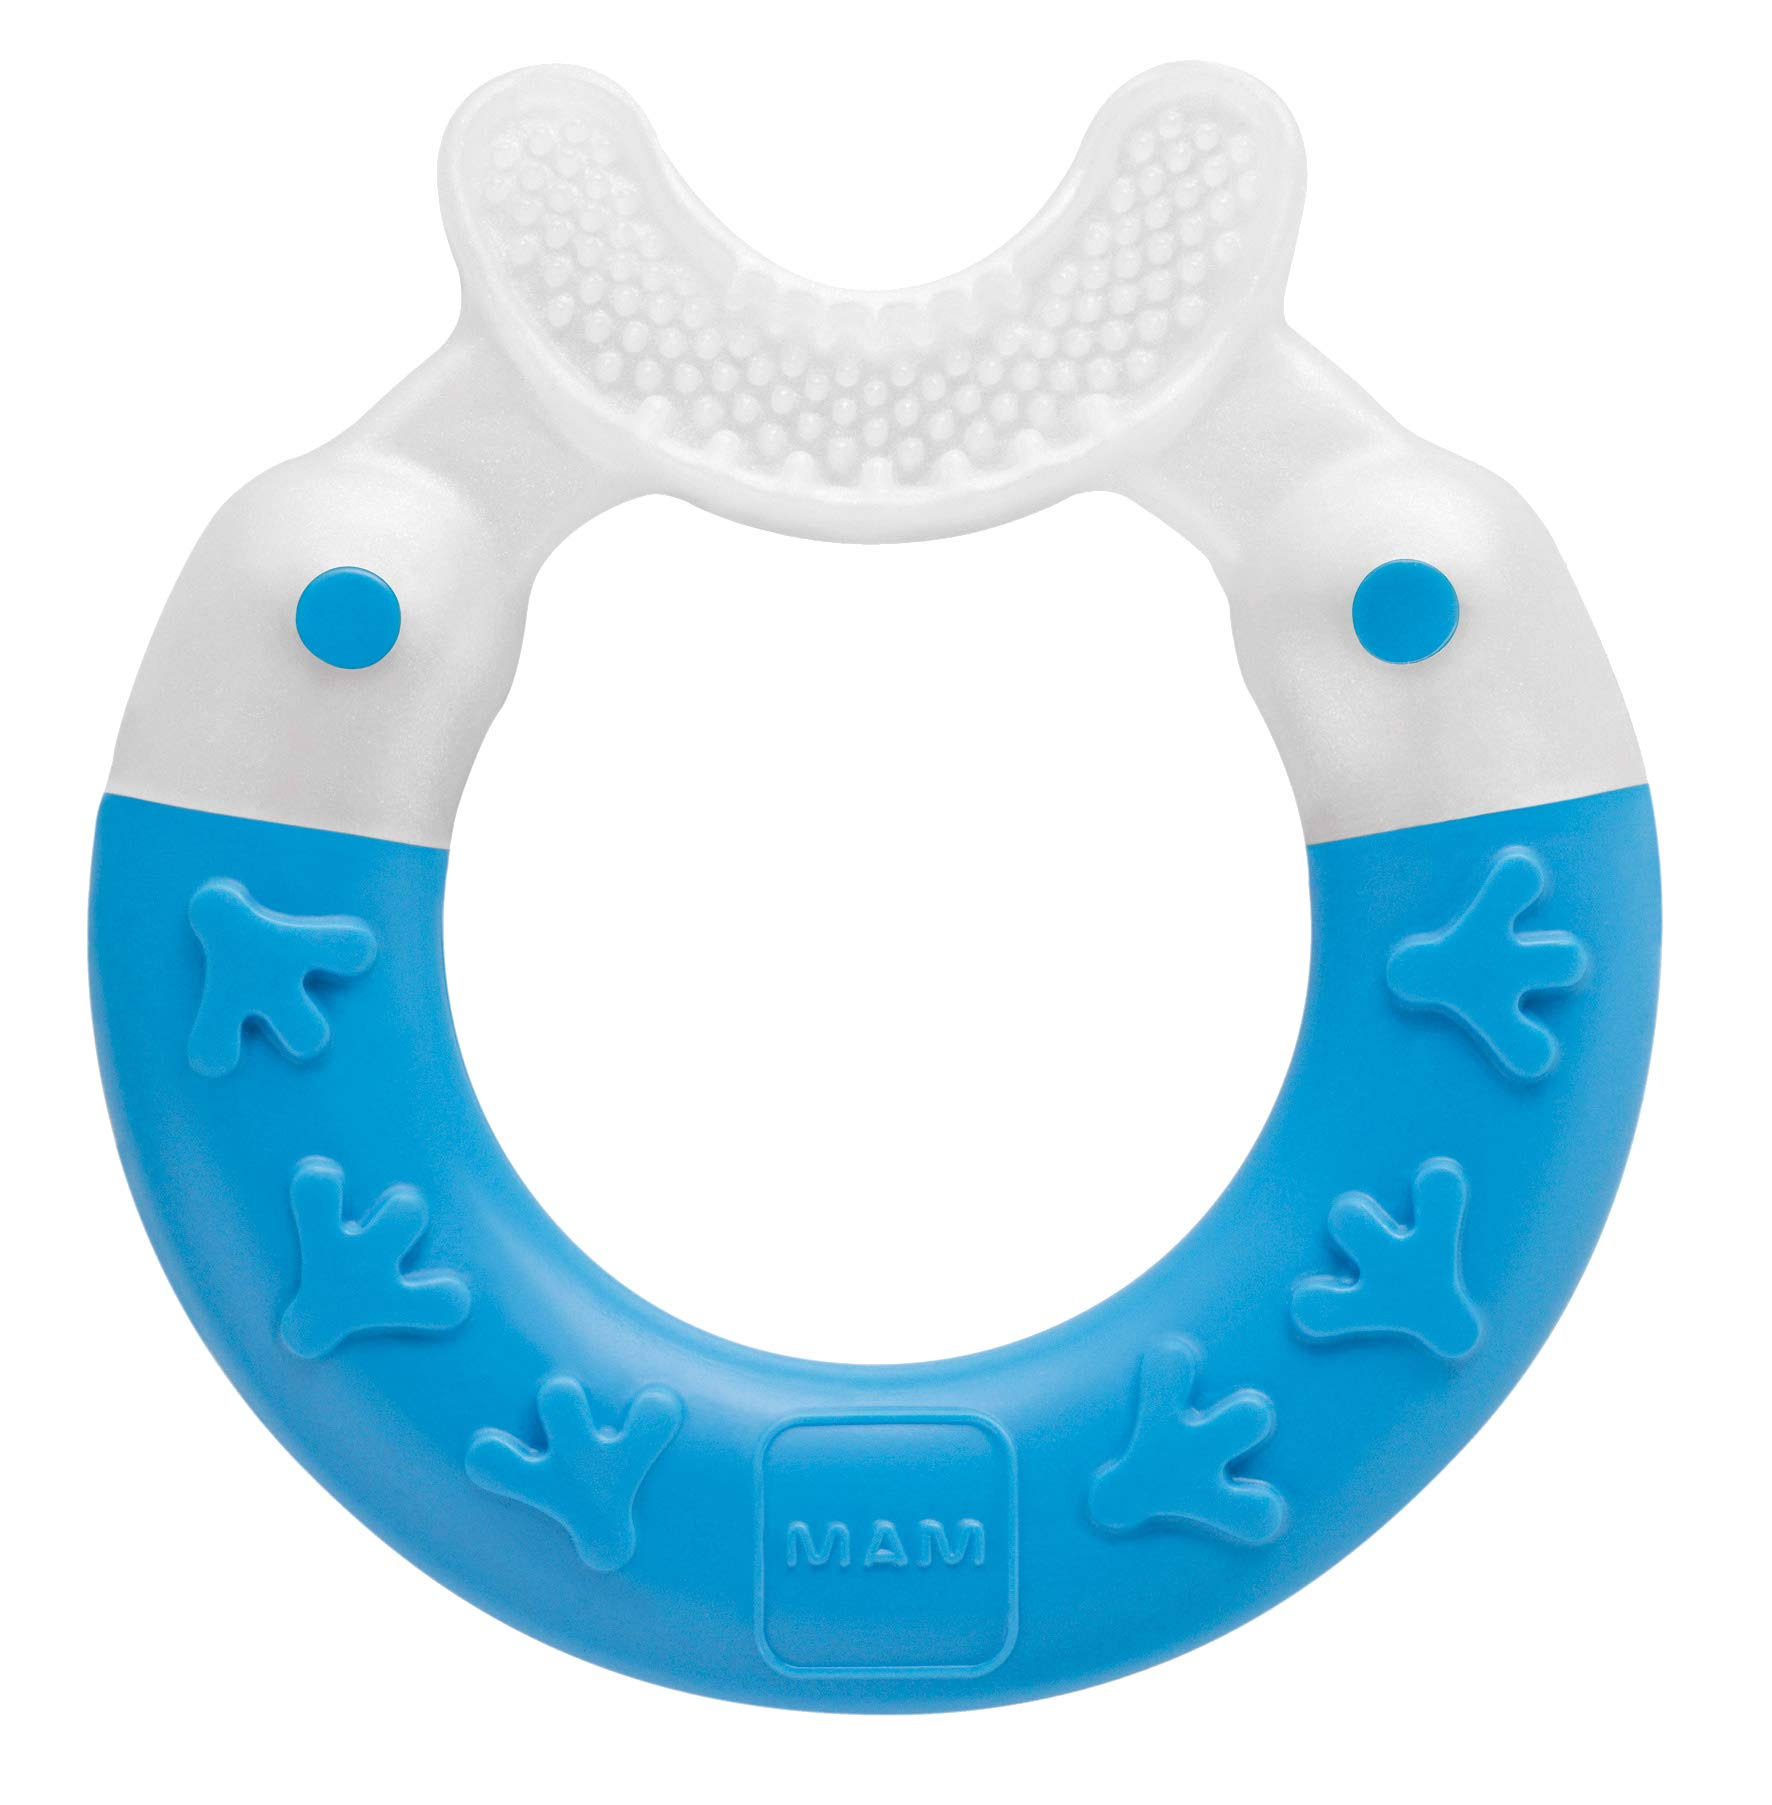 MAM Bite and Brush Teether, Blue | Baby & Child Care | Best Price Guarantee | 30 Day Money Back Guarantee | Free Shipping On All Orders